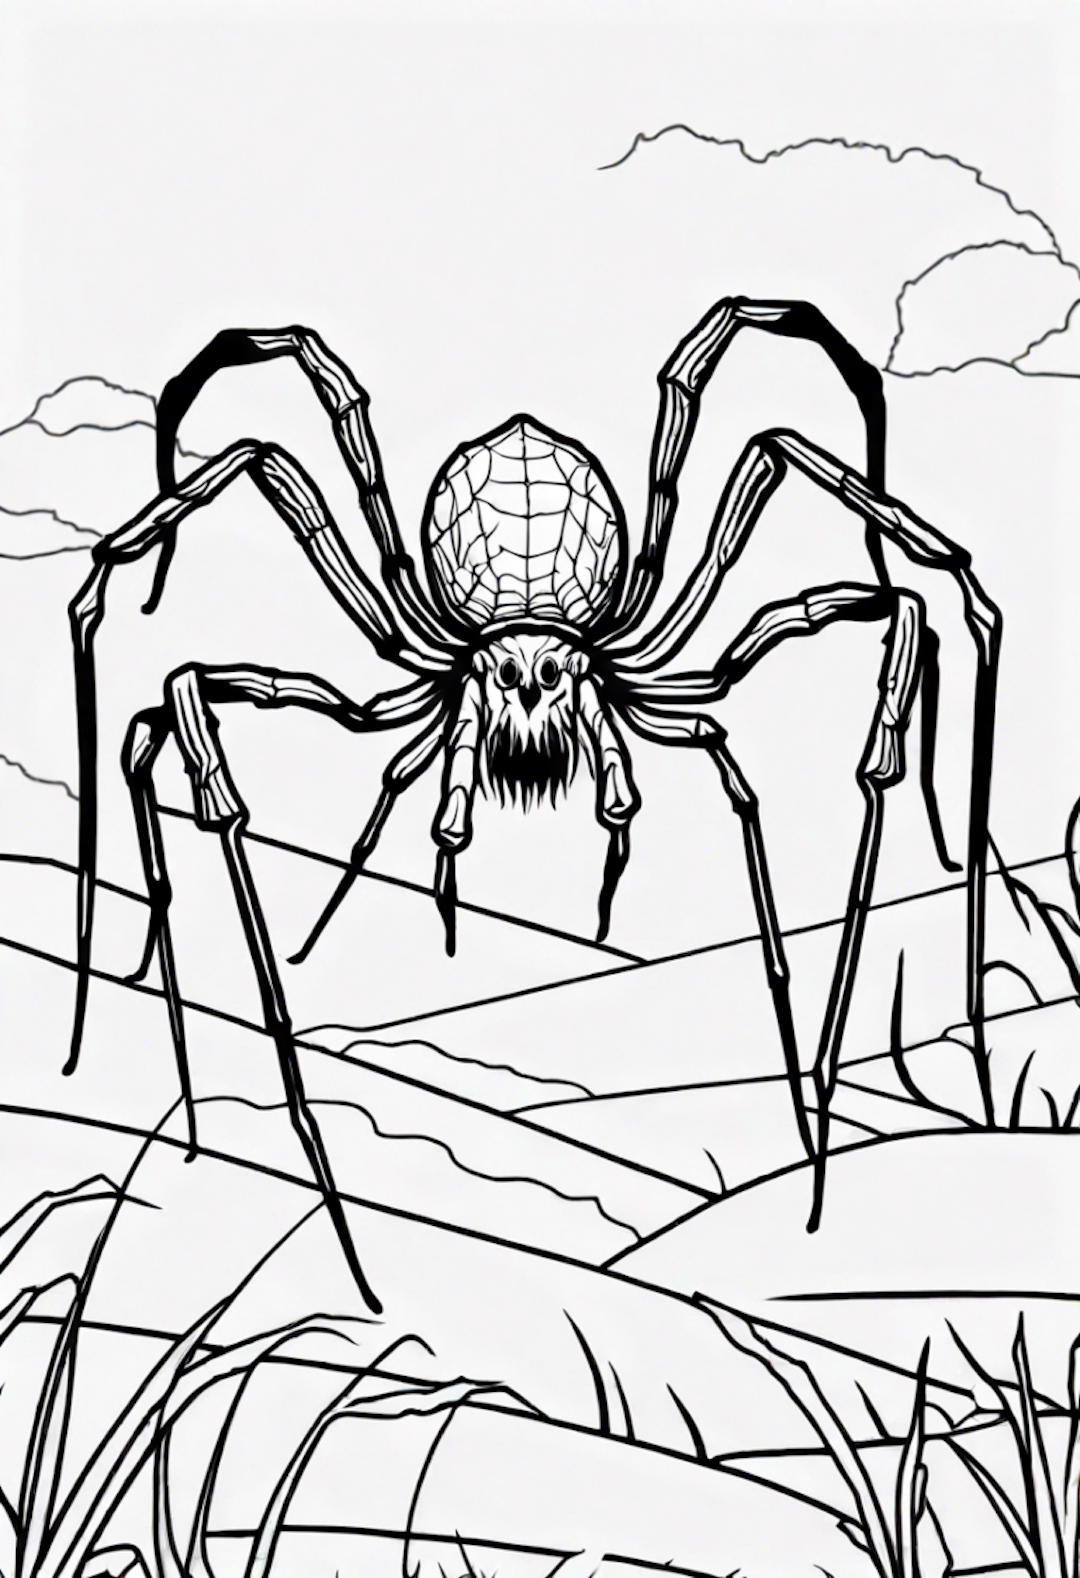 Giant Spider in the Wilderness Coloring Page coloring pages